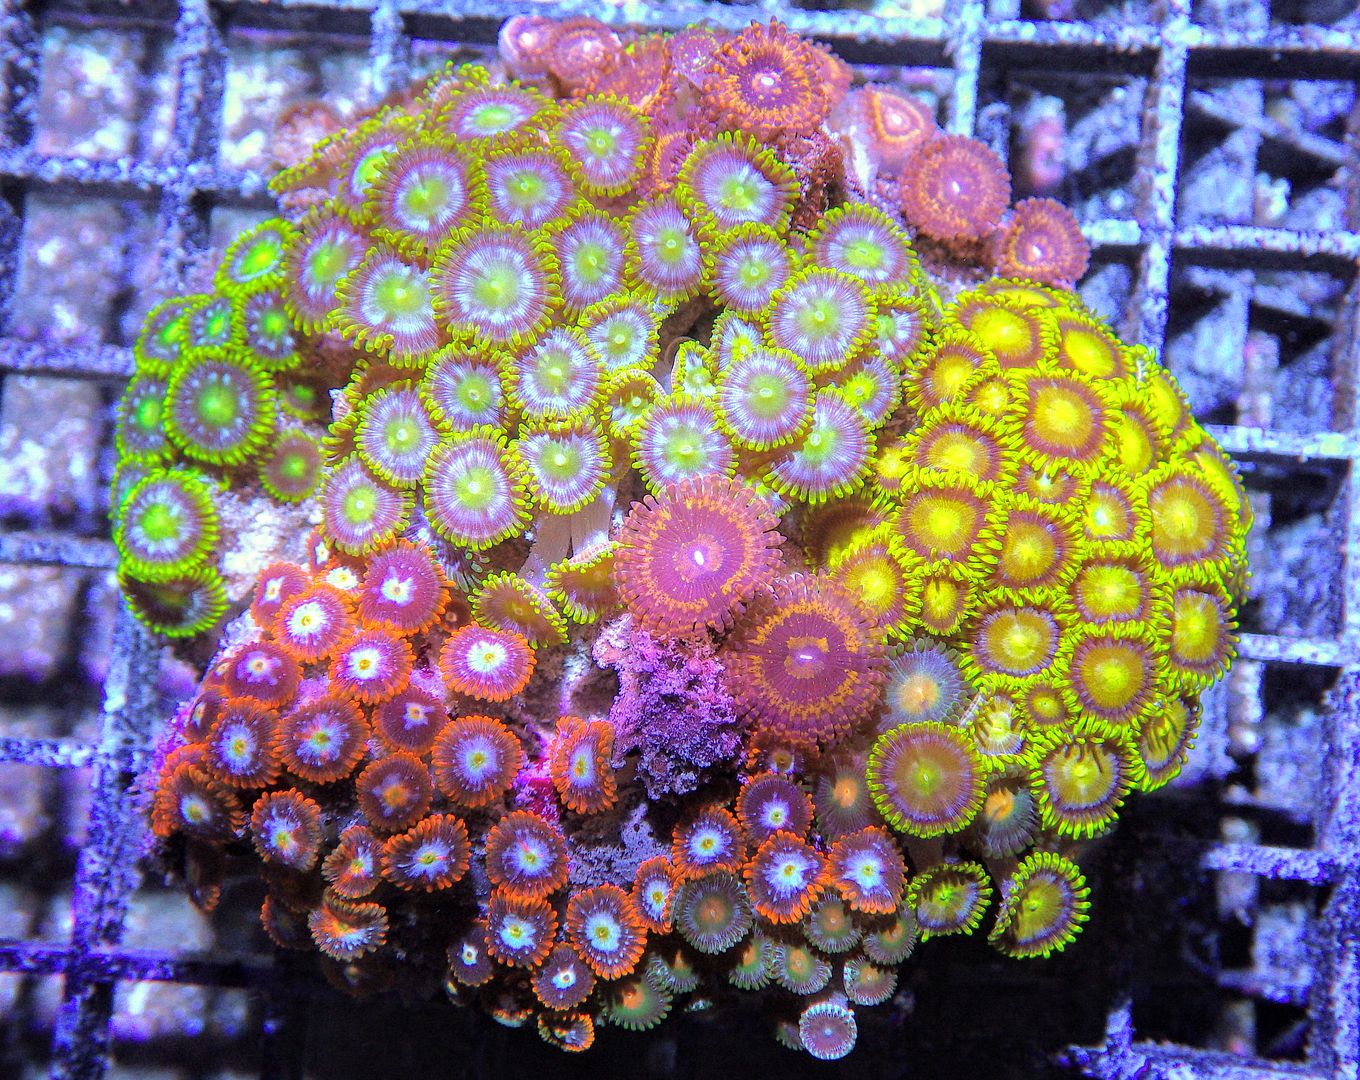 RIMG86052 zps5c6hvefn - New Mushrooms & Pieces of The Reef